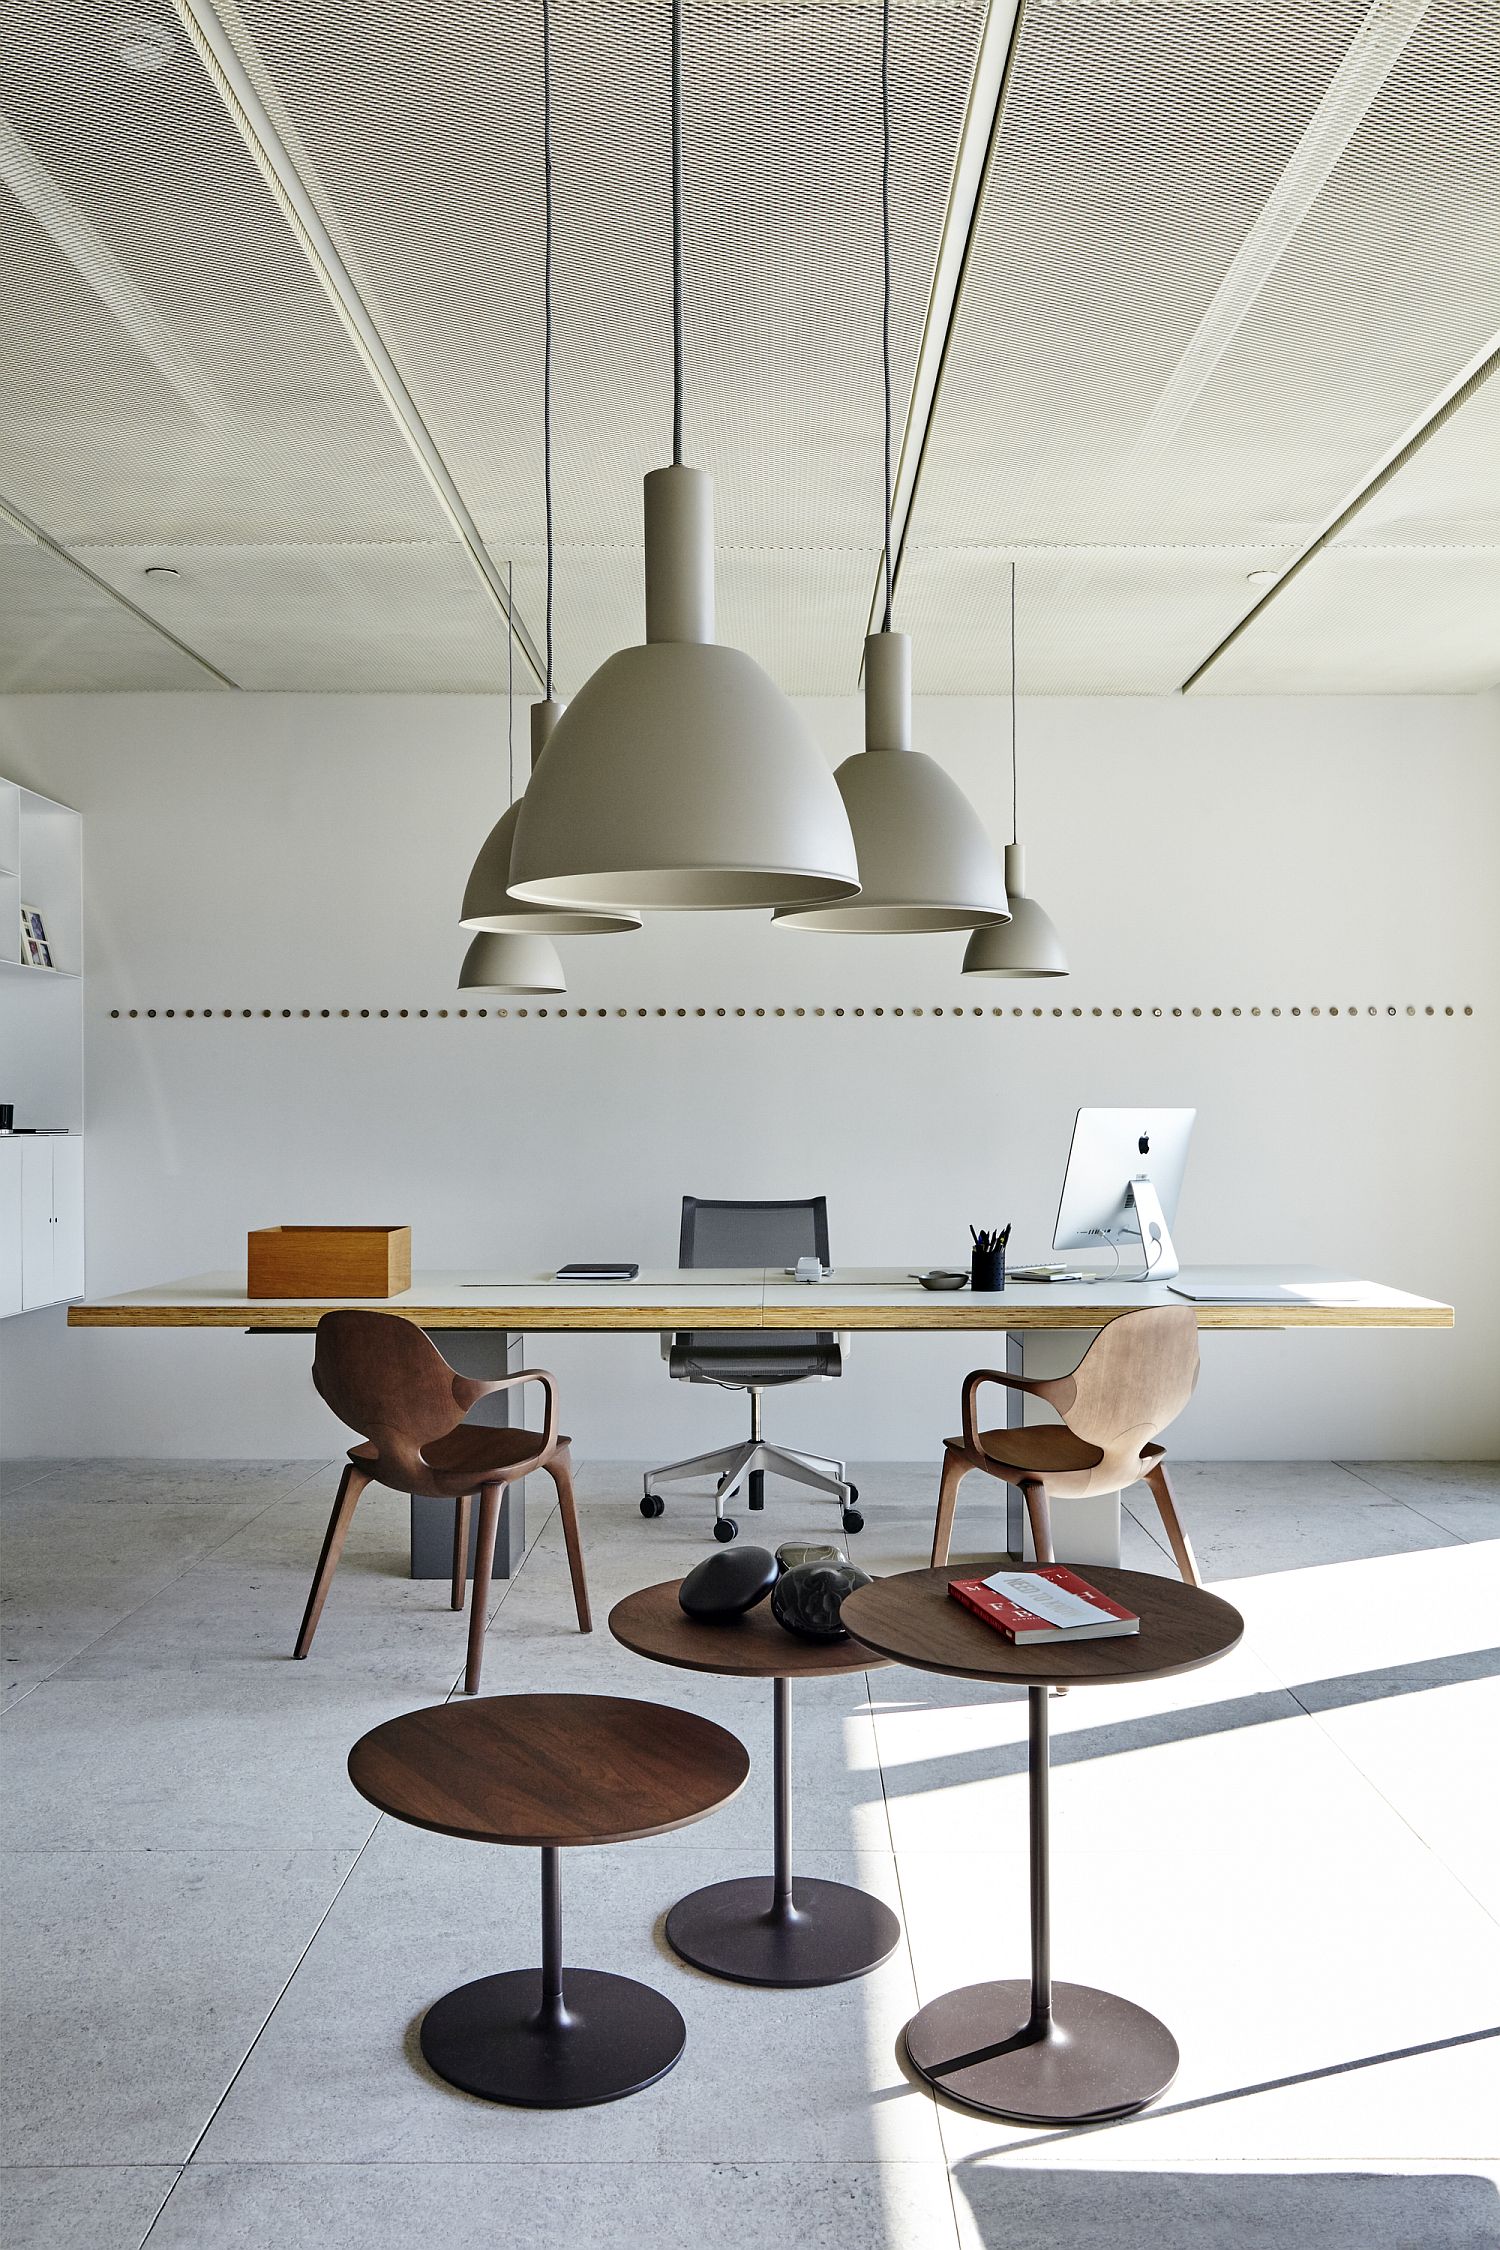 Sleek-and-modern-decor-of-the-office-fits-in-with-its-contemporary-appeal